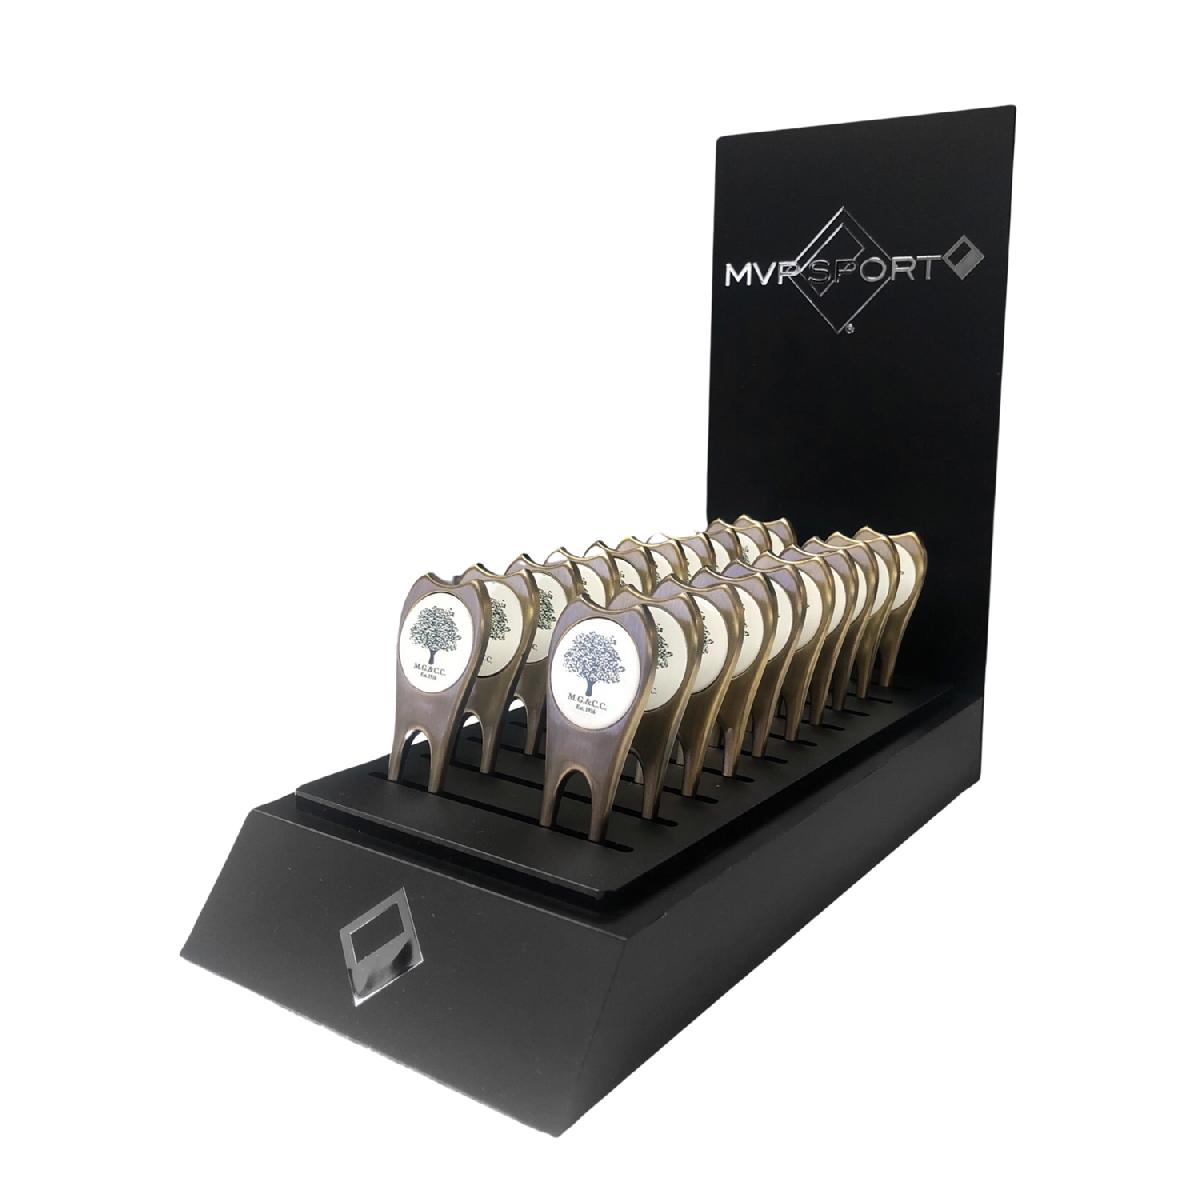 Classic Divot Repair Tool with Ball Marker and Club Rest. - Die Struck Logo - With Display